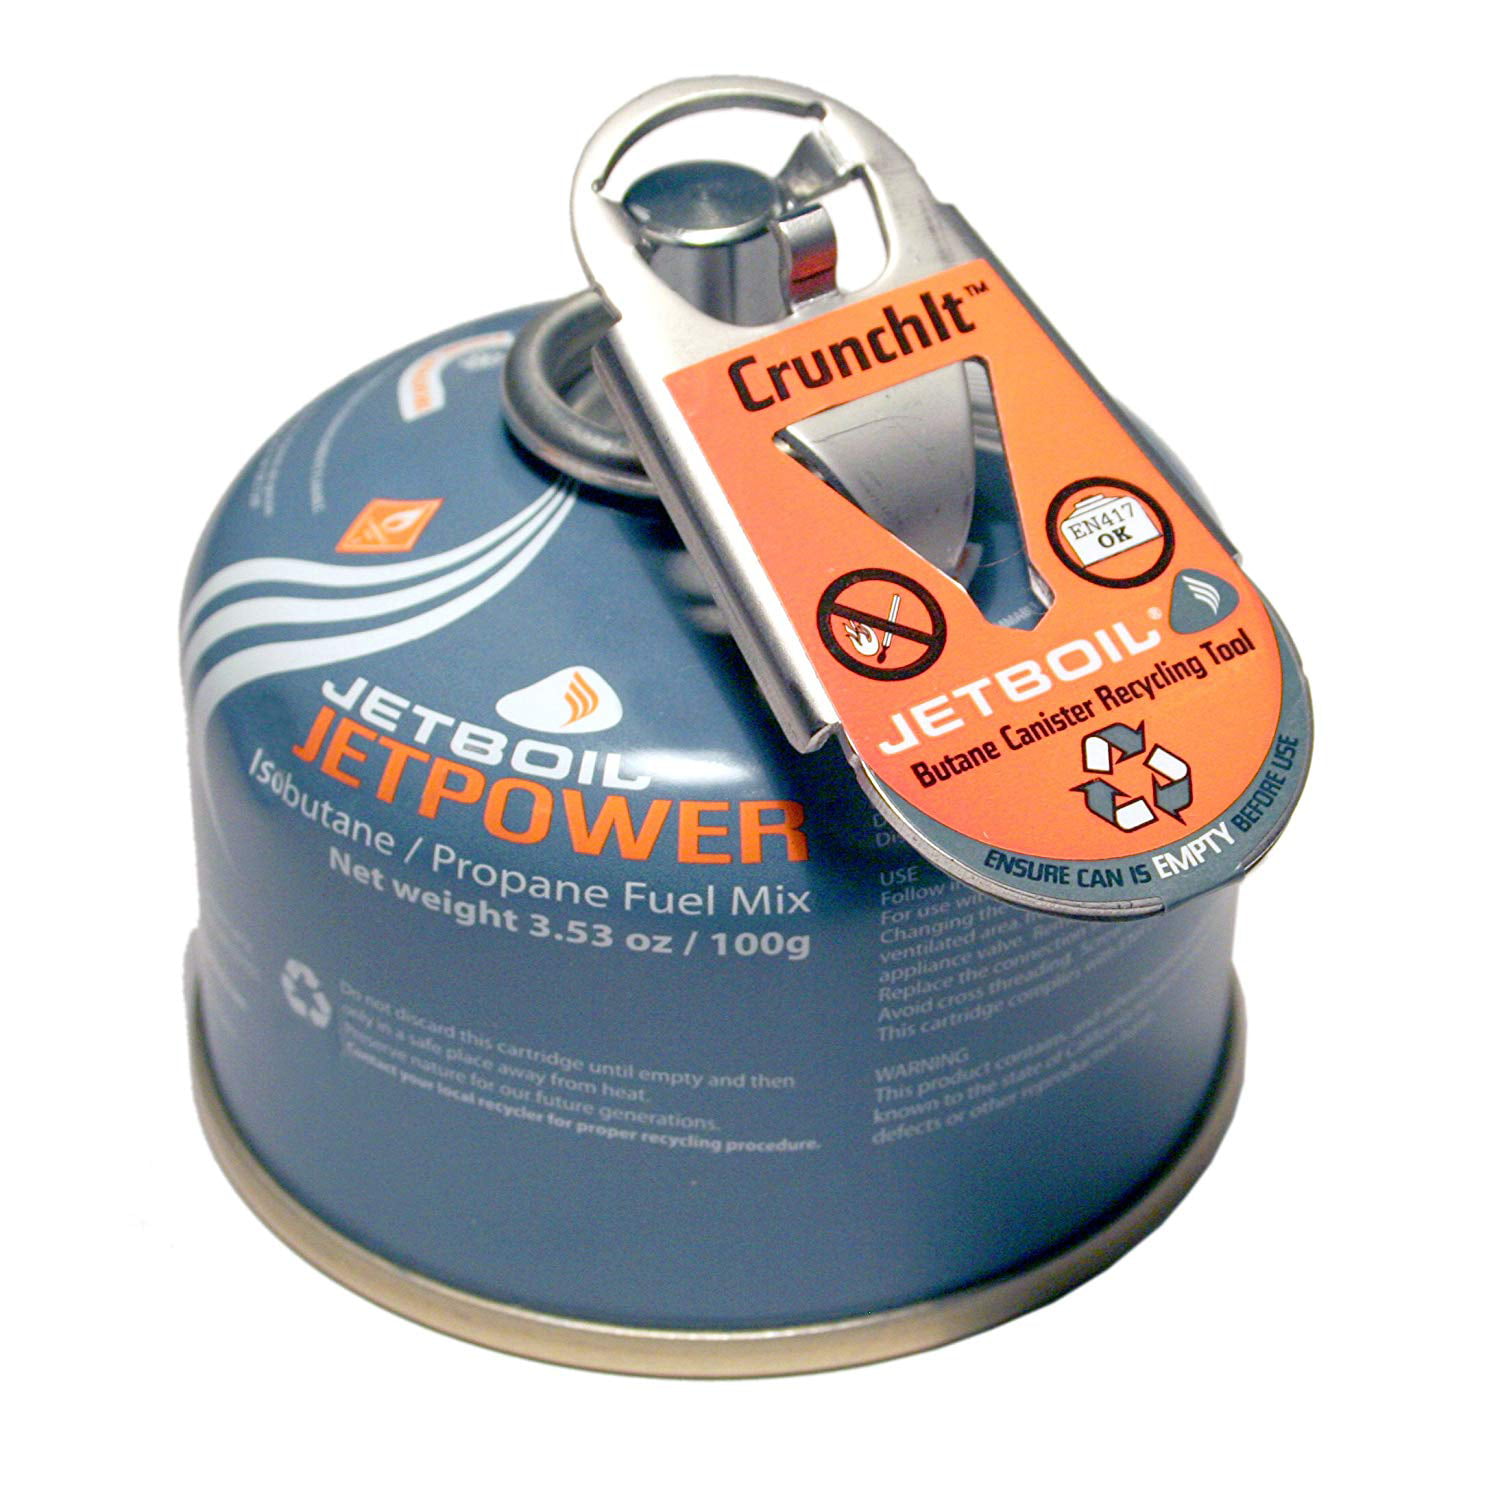 Jetboil Crunchit Fuel Cannister Recycling Accessory in Orange 